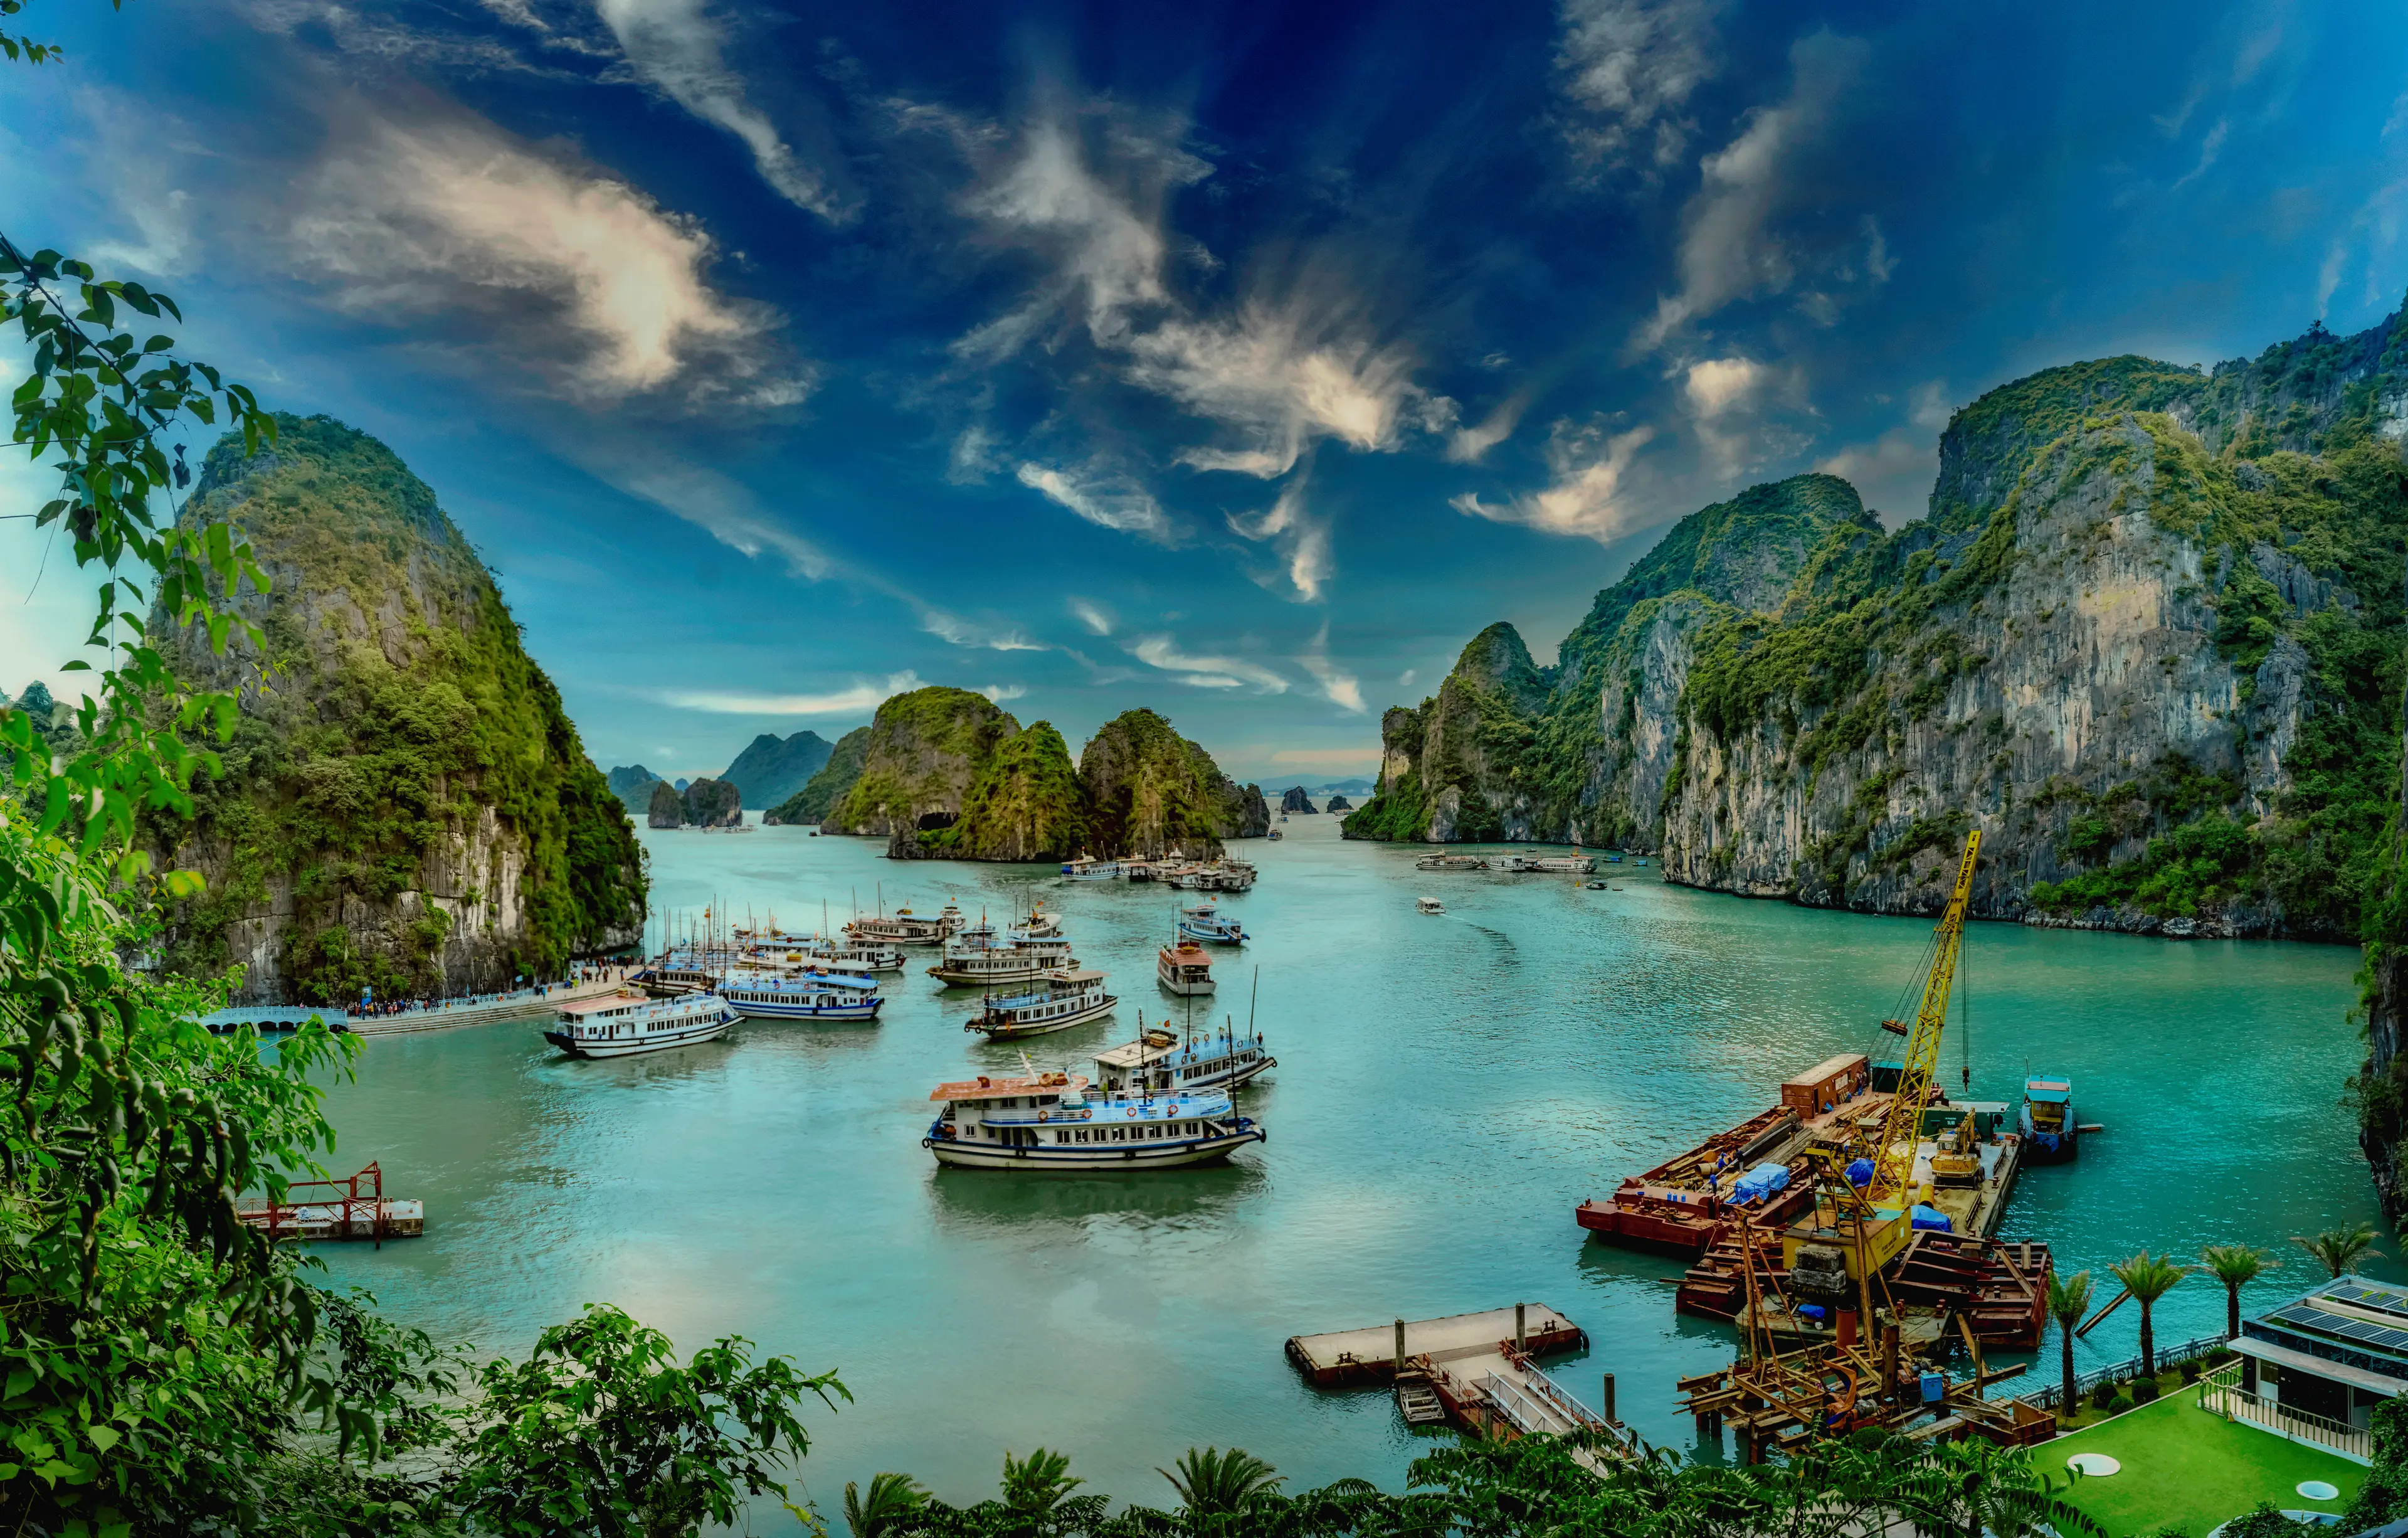 3-Day Local Experience in Ha Long Bay: Adventure, Nightlife & Sightseeing